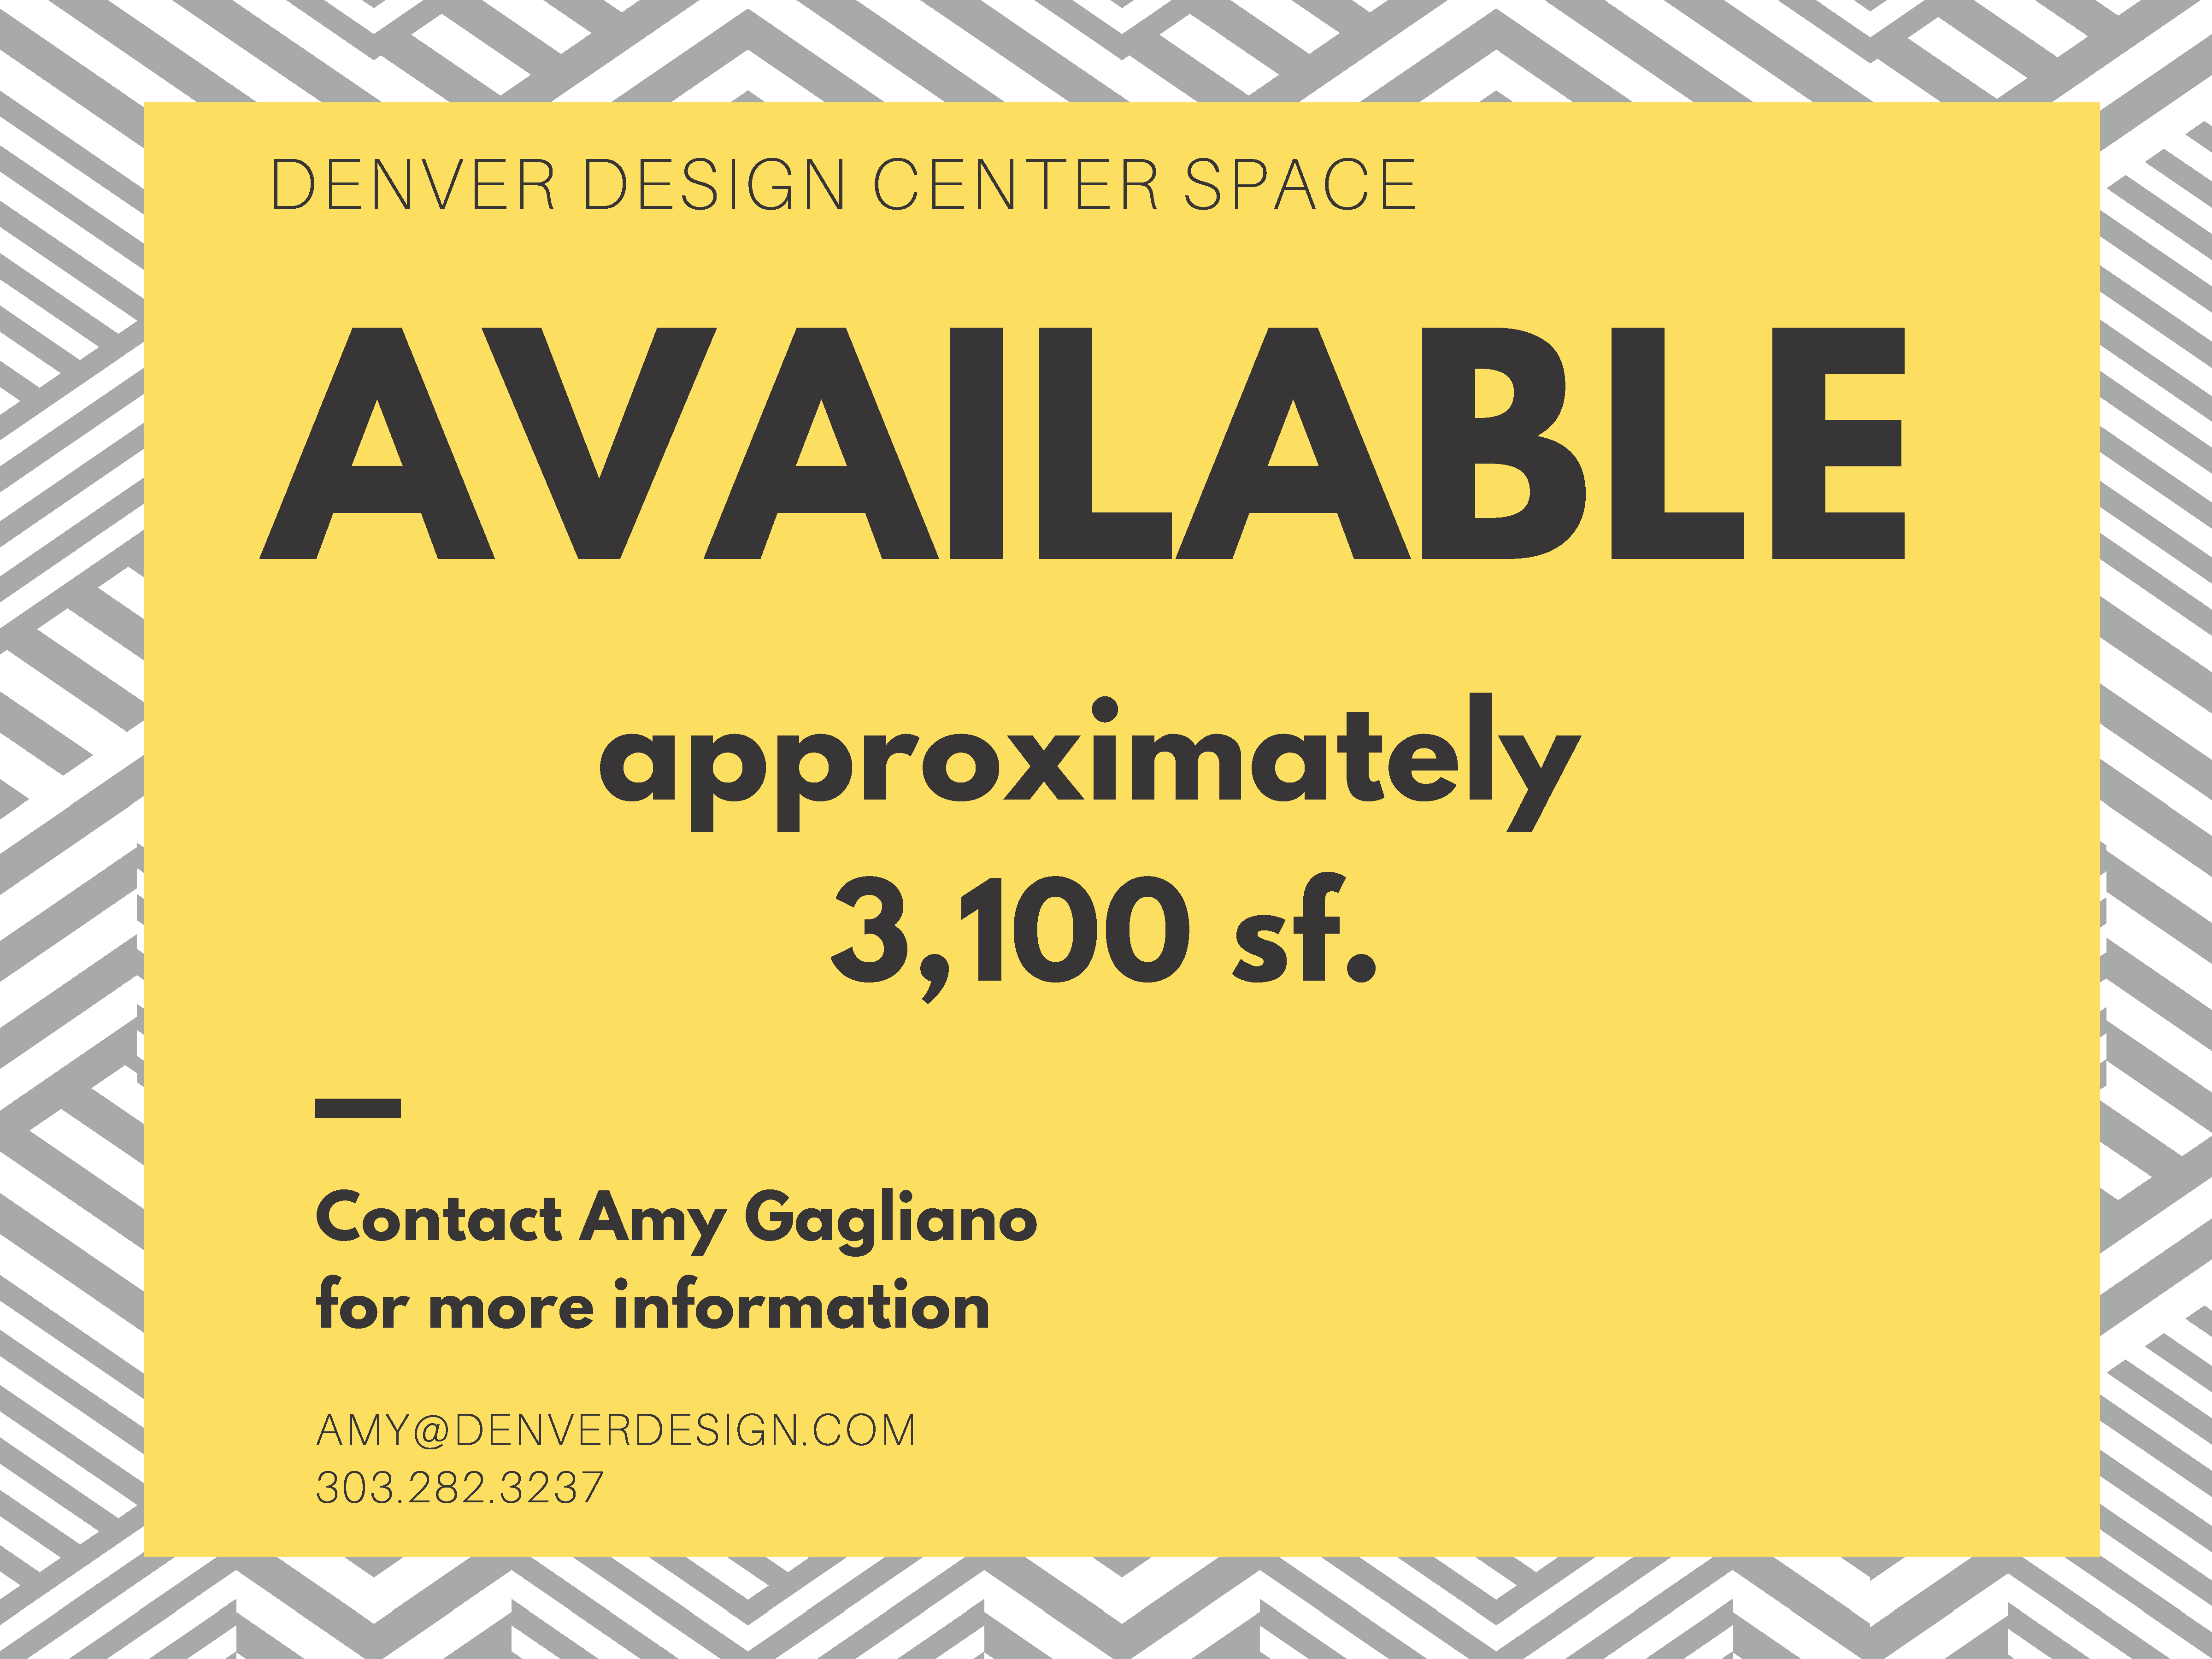 Showroom Space Available 1.11.2022 Page 1